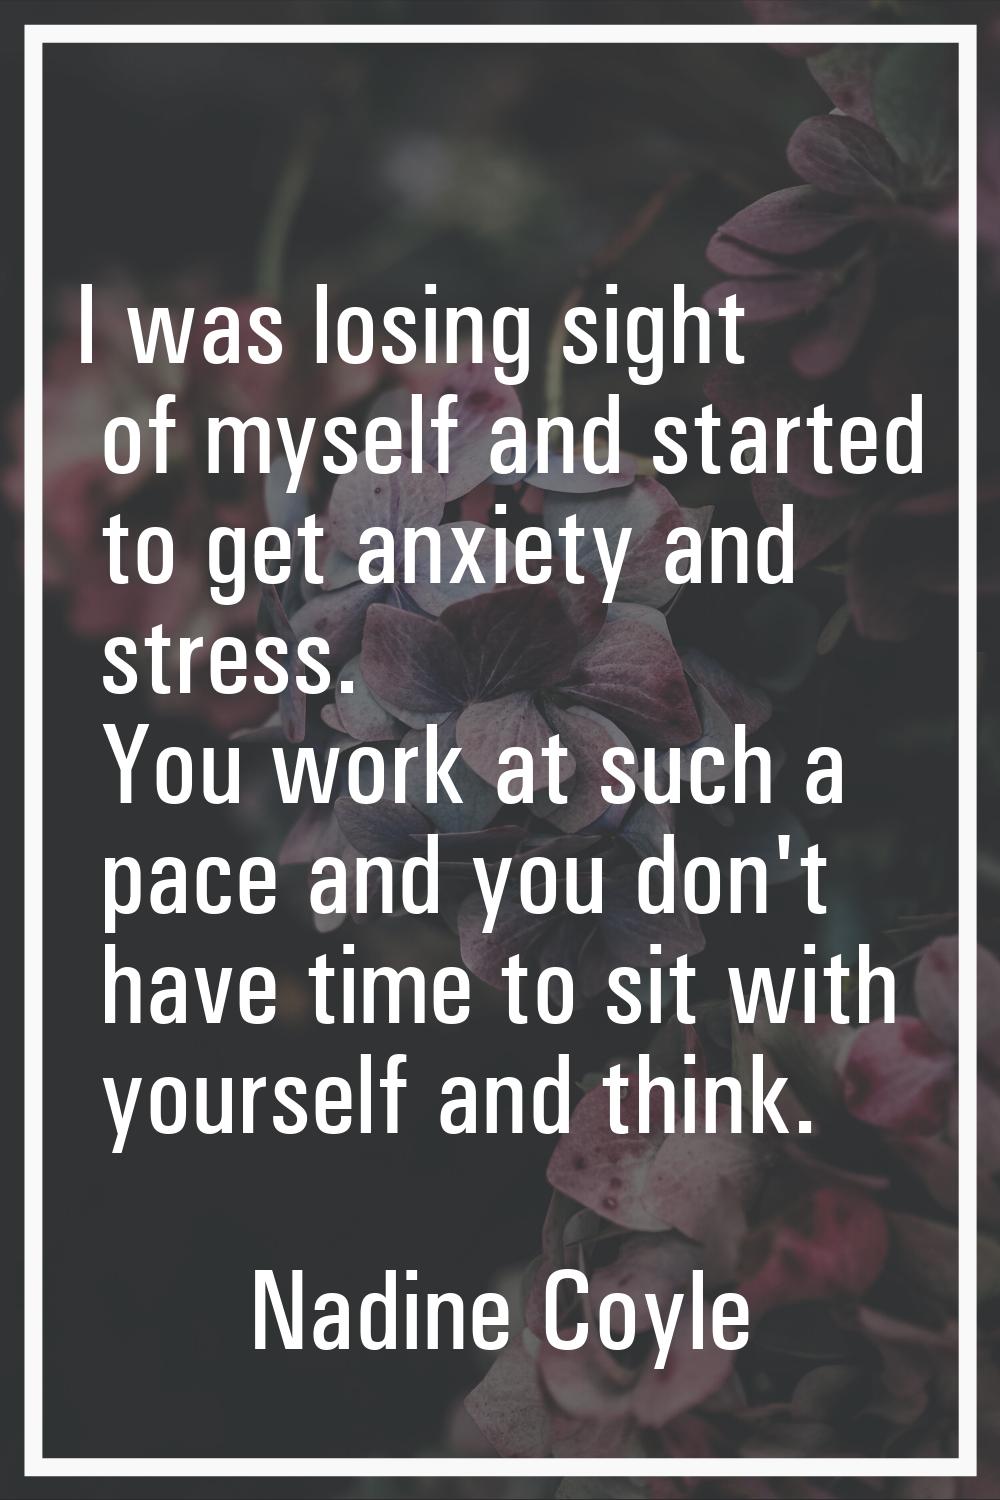 I was losing sight of myself and started to get anxiety and stress. You work at such a pace and you